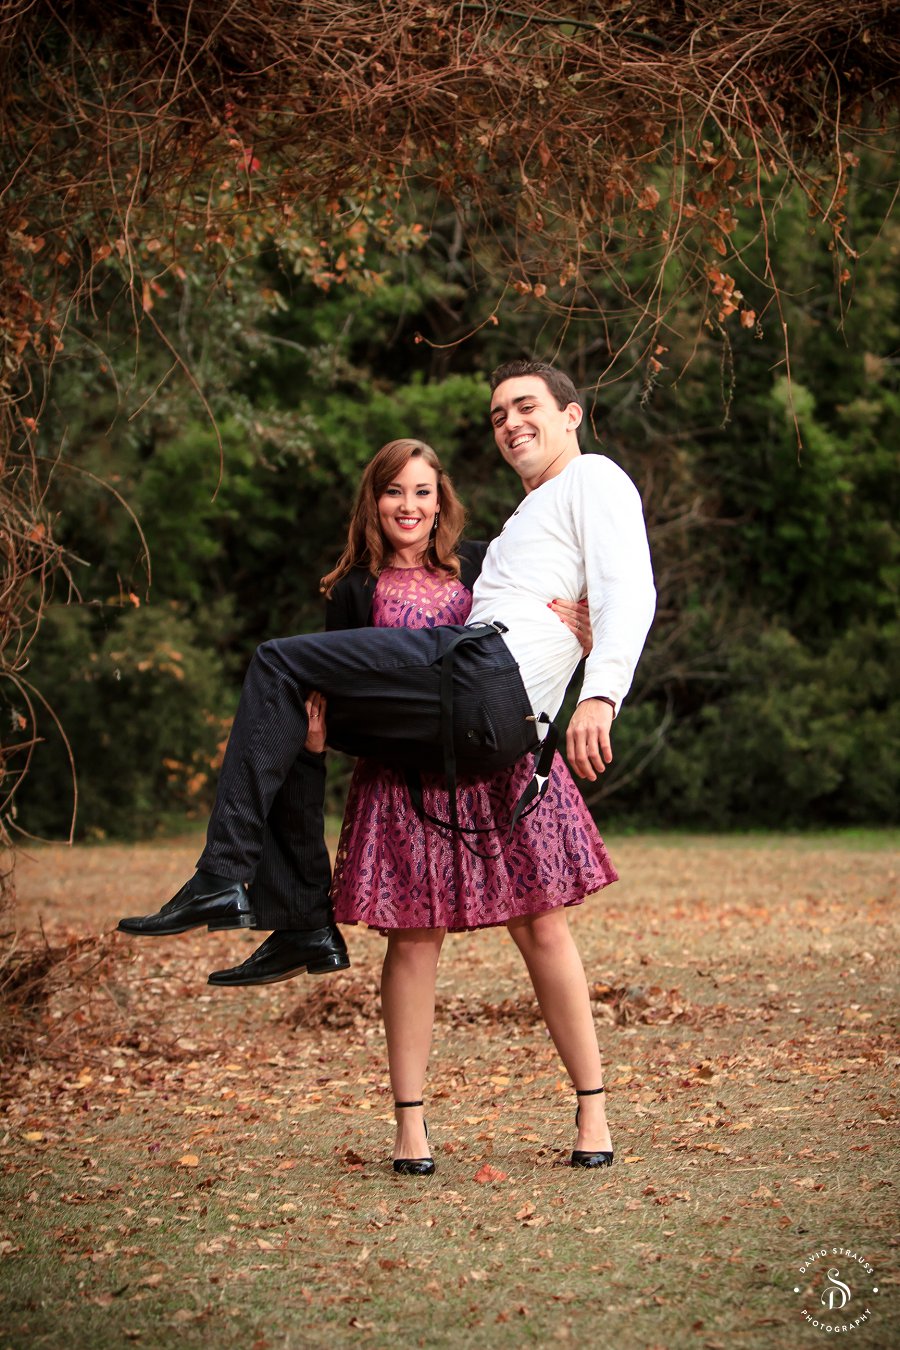 Boone Hall Engagement Pictures - Charleston Wedding Photographer David Strauss - Morgan and Andrew - 6